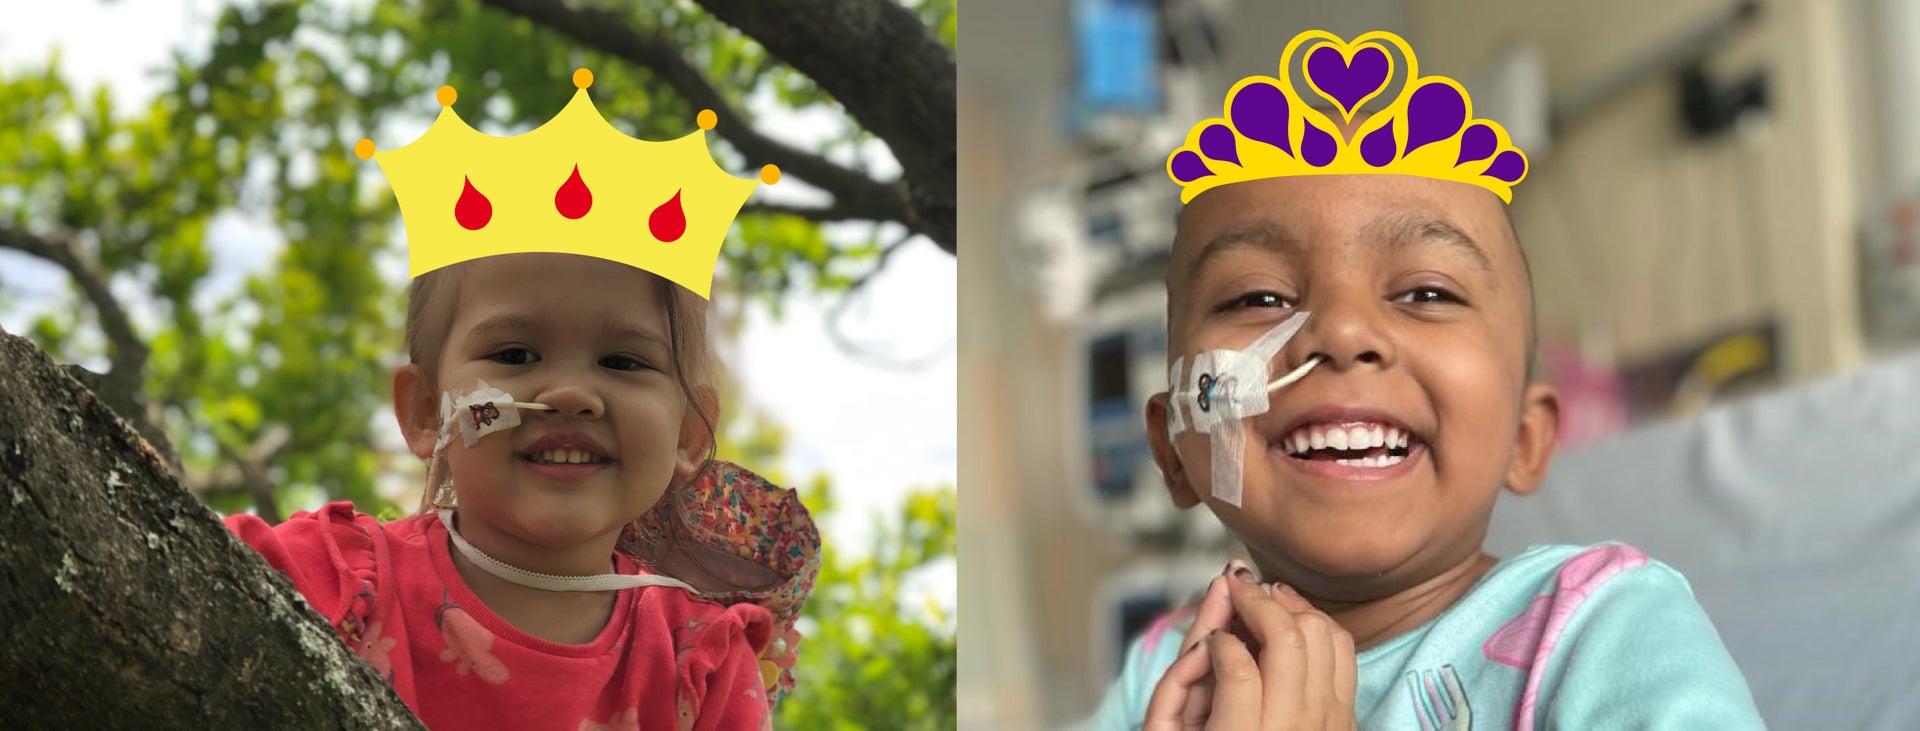 Livia and Esha pictured with cartoon crowns